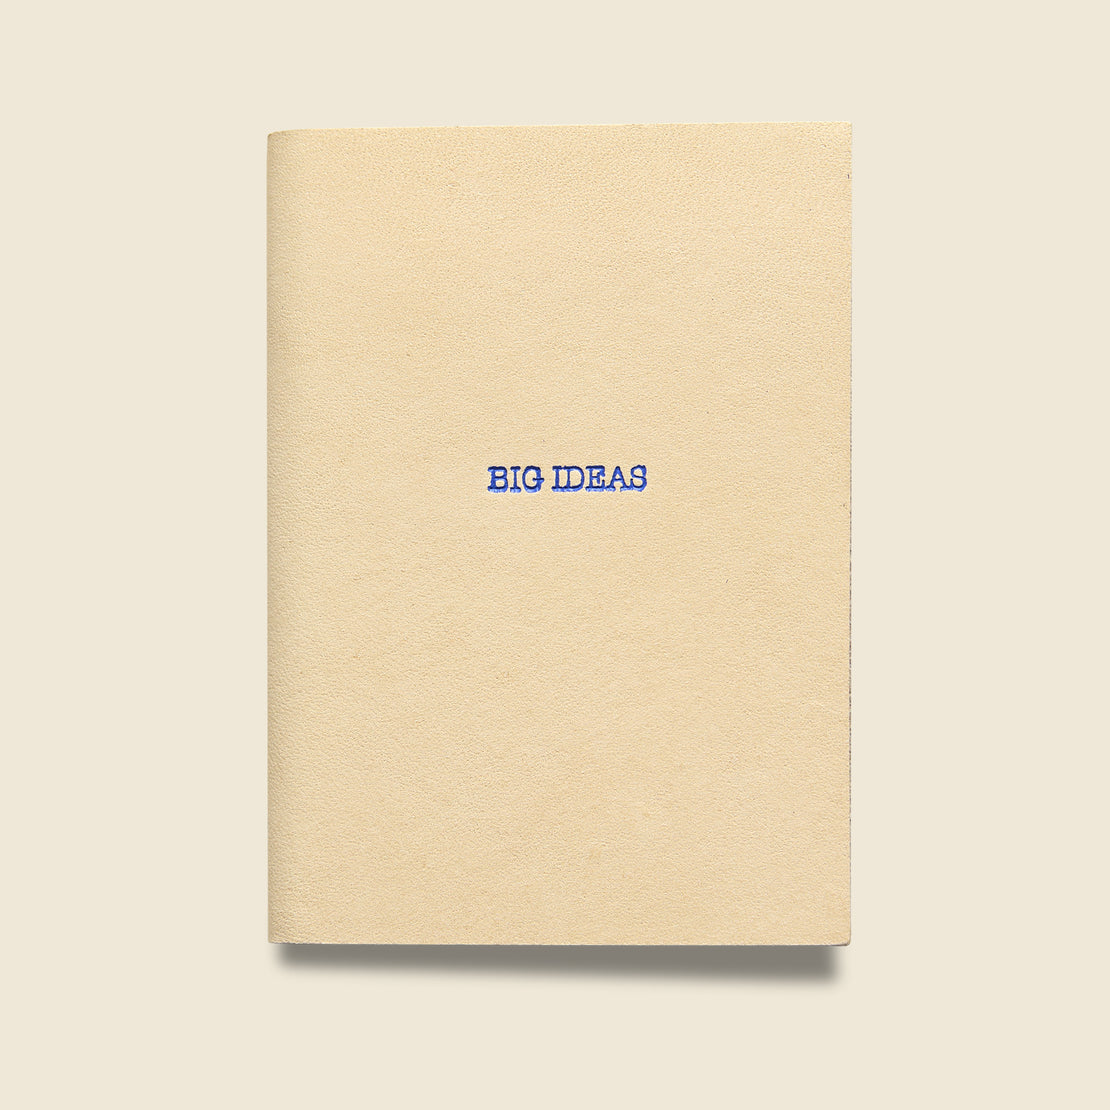 Paper Goods "BIG IDEAS" Leather Journal - Natural